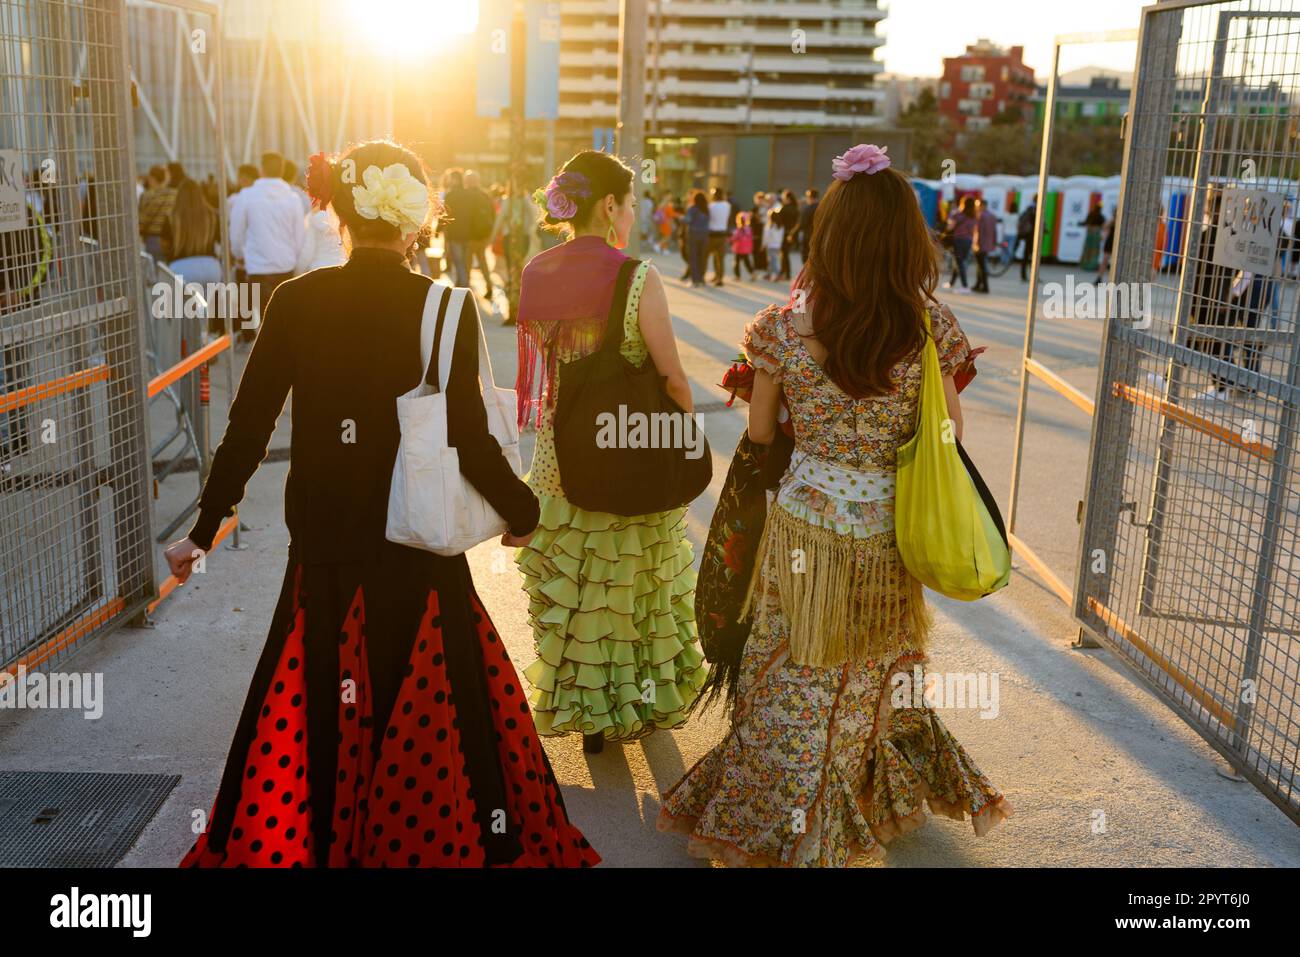 Barcelona, Spain - 23 April 2023: Women in traditional andalusian dresses are seen during celebrations for traditional 'Feria de Abril' or Seville Fai Stock Photo